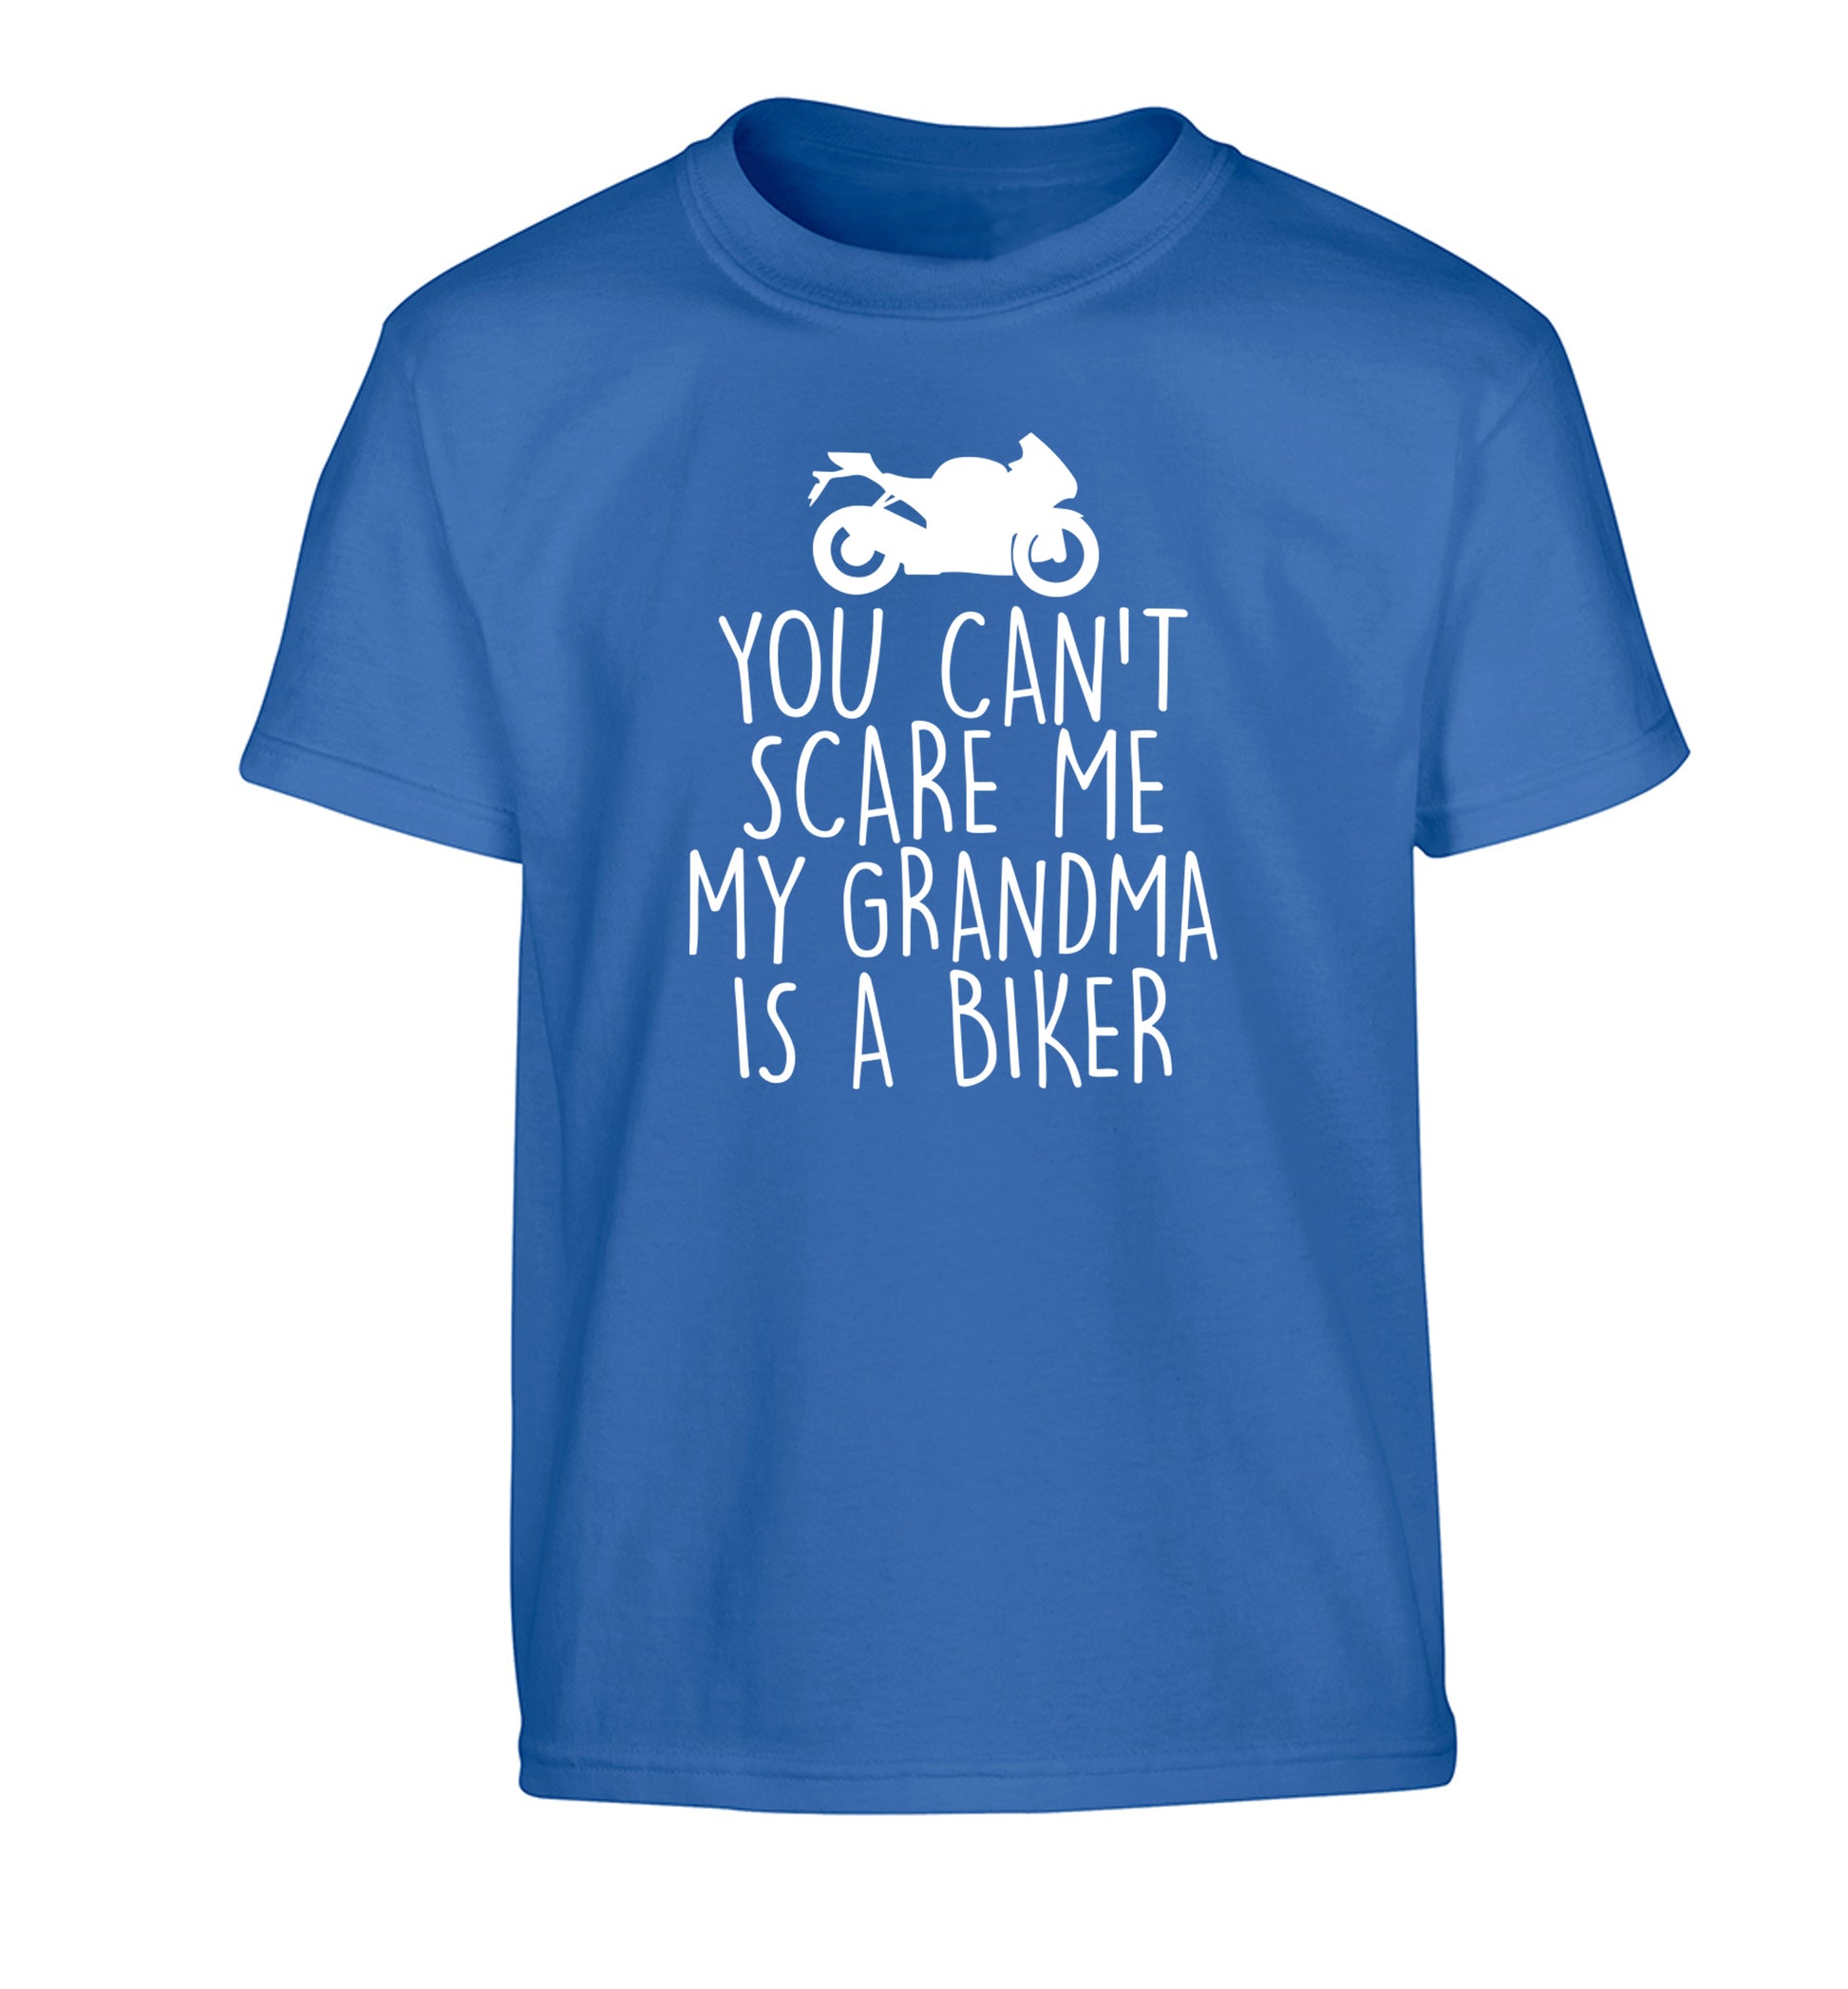 You can't scare me my grandma is a biker Children's blue Tshirt 12-13 Years